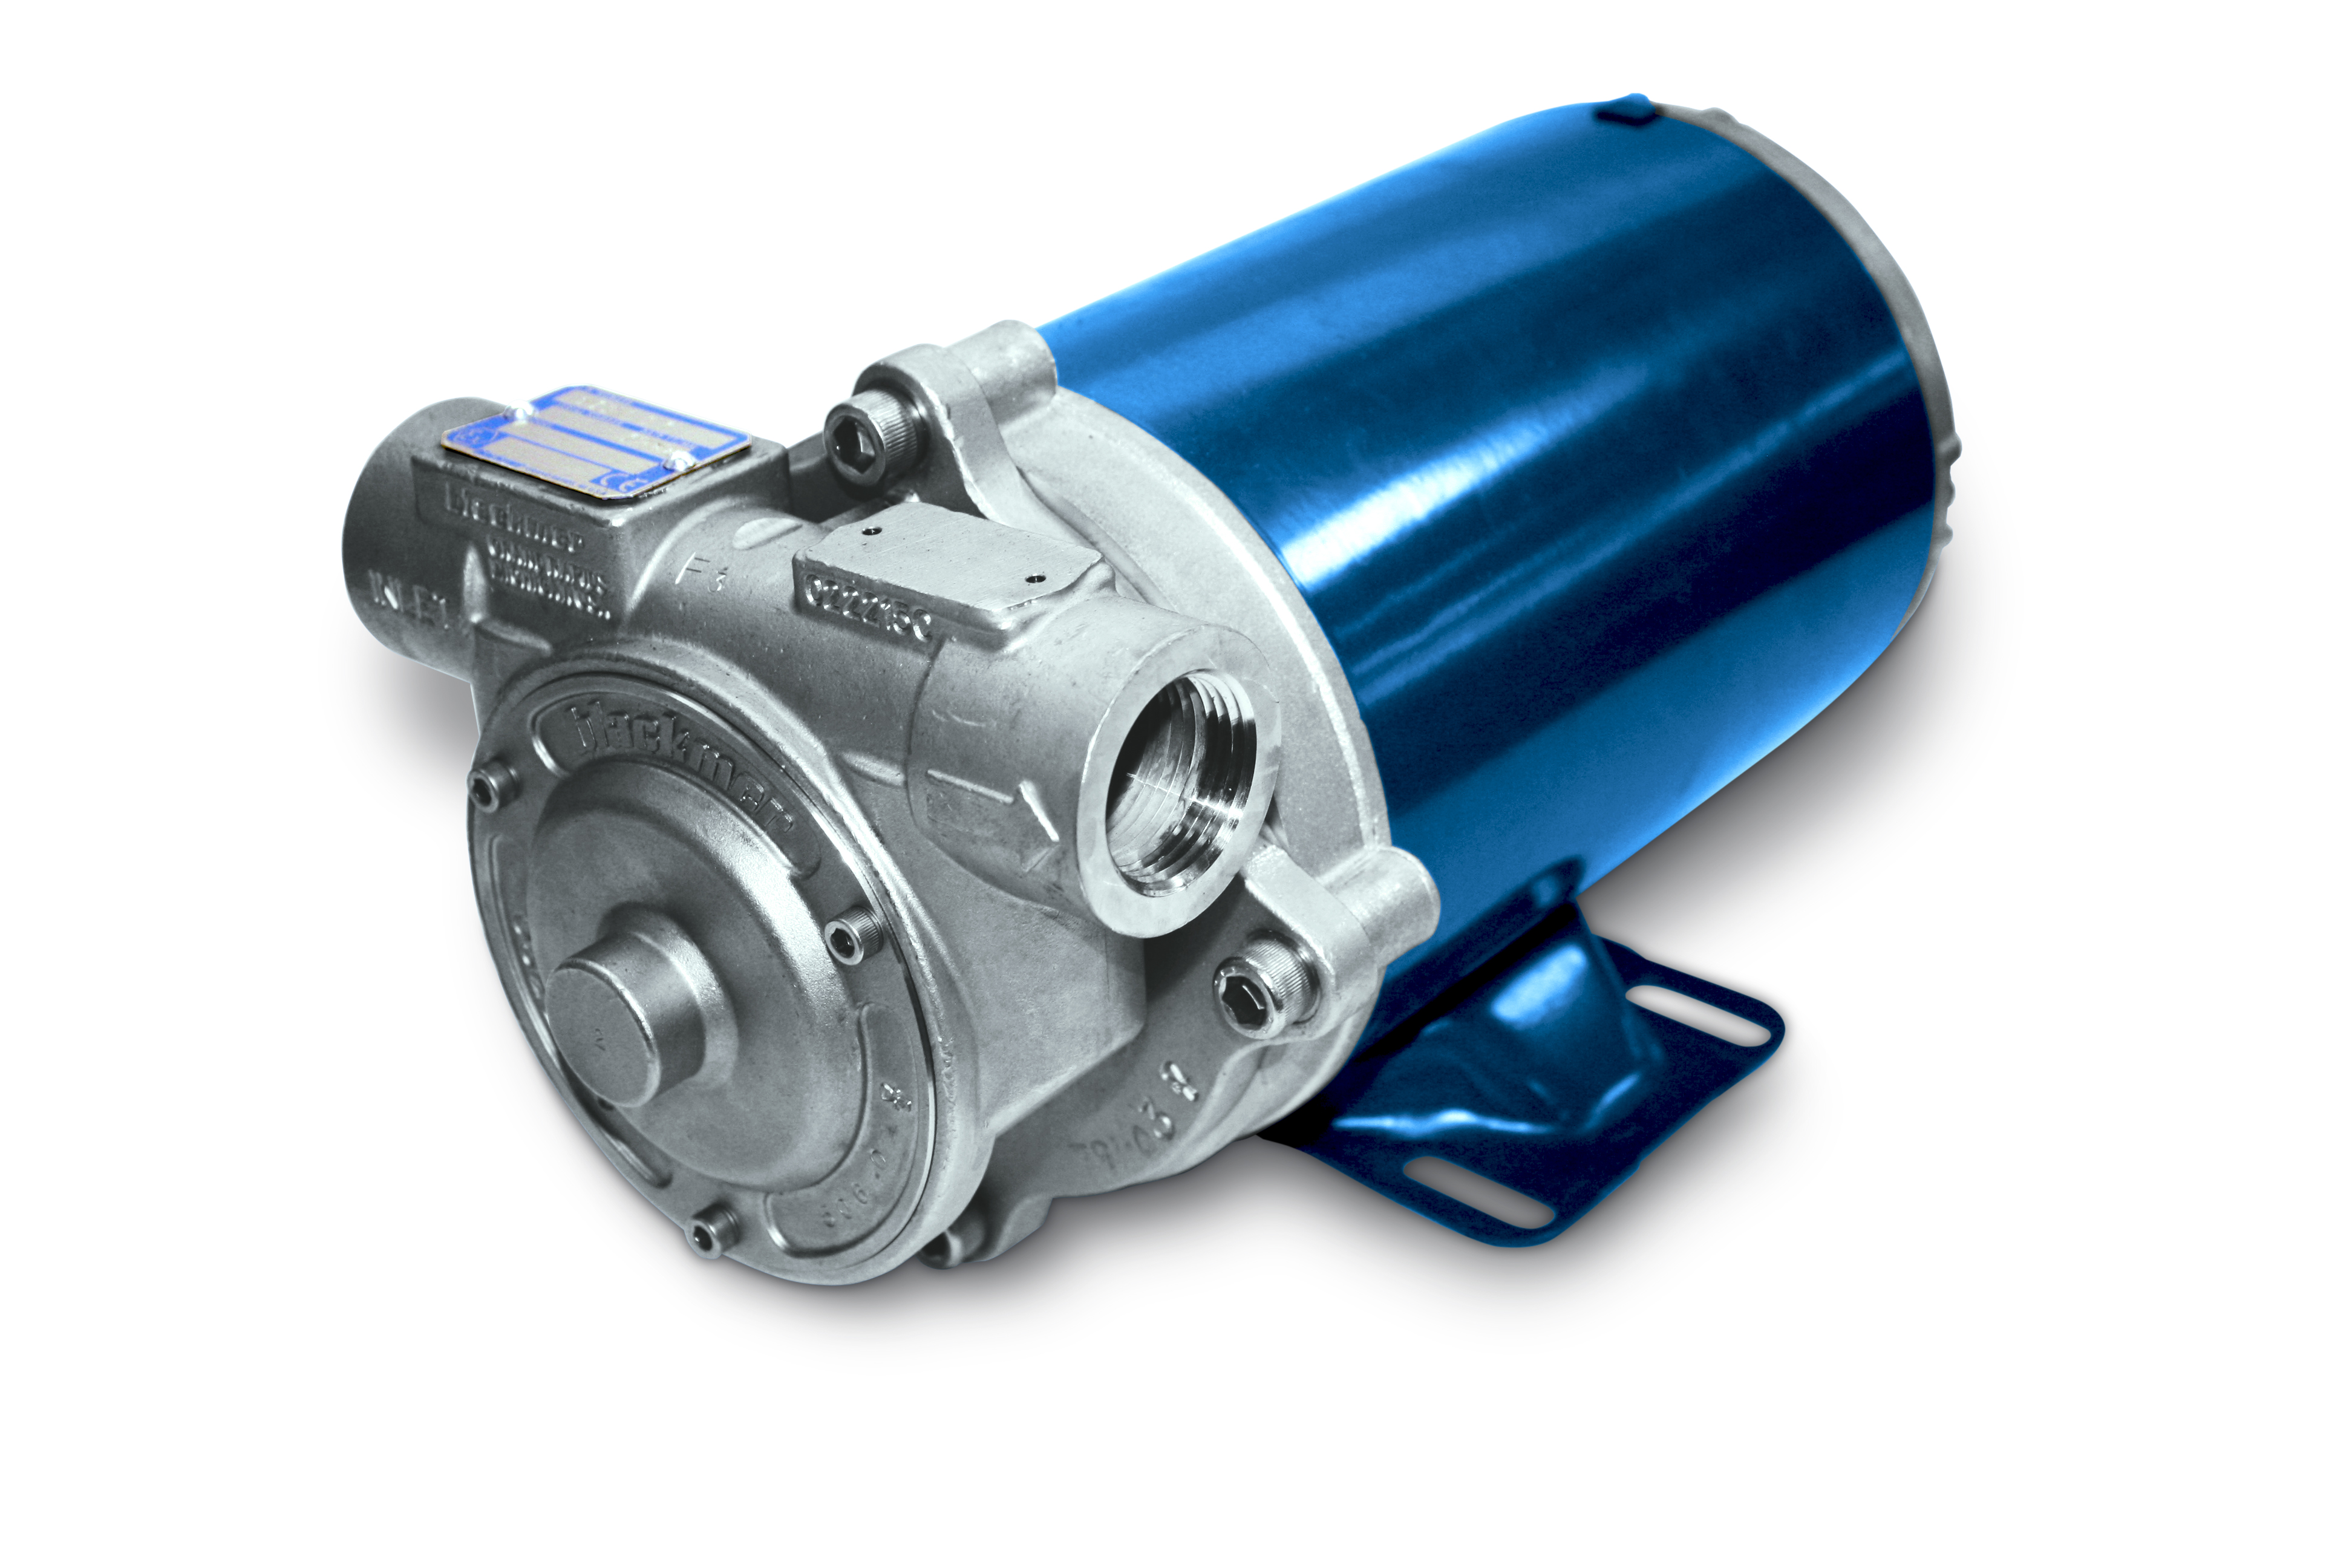 The the SX1B-DEF pump is the incorporation of a 316 stainless-steel motor shaft as the pump shaft.